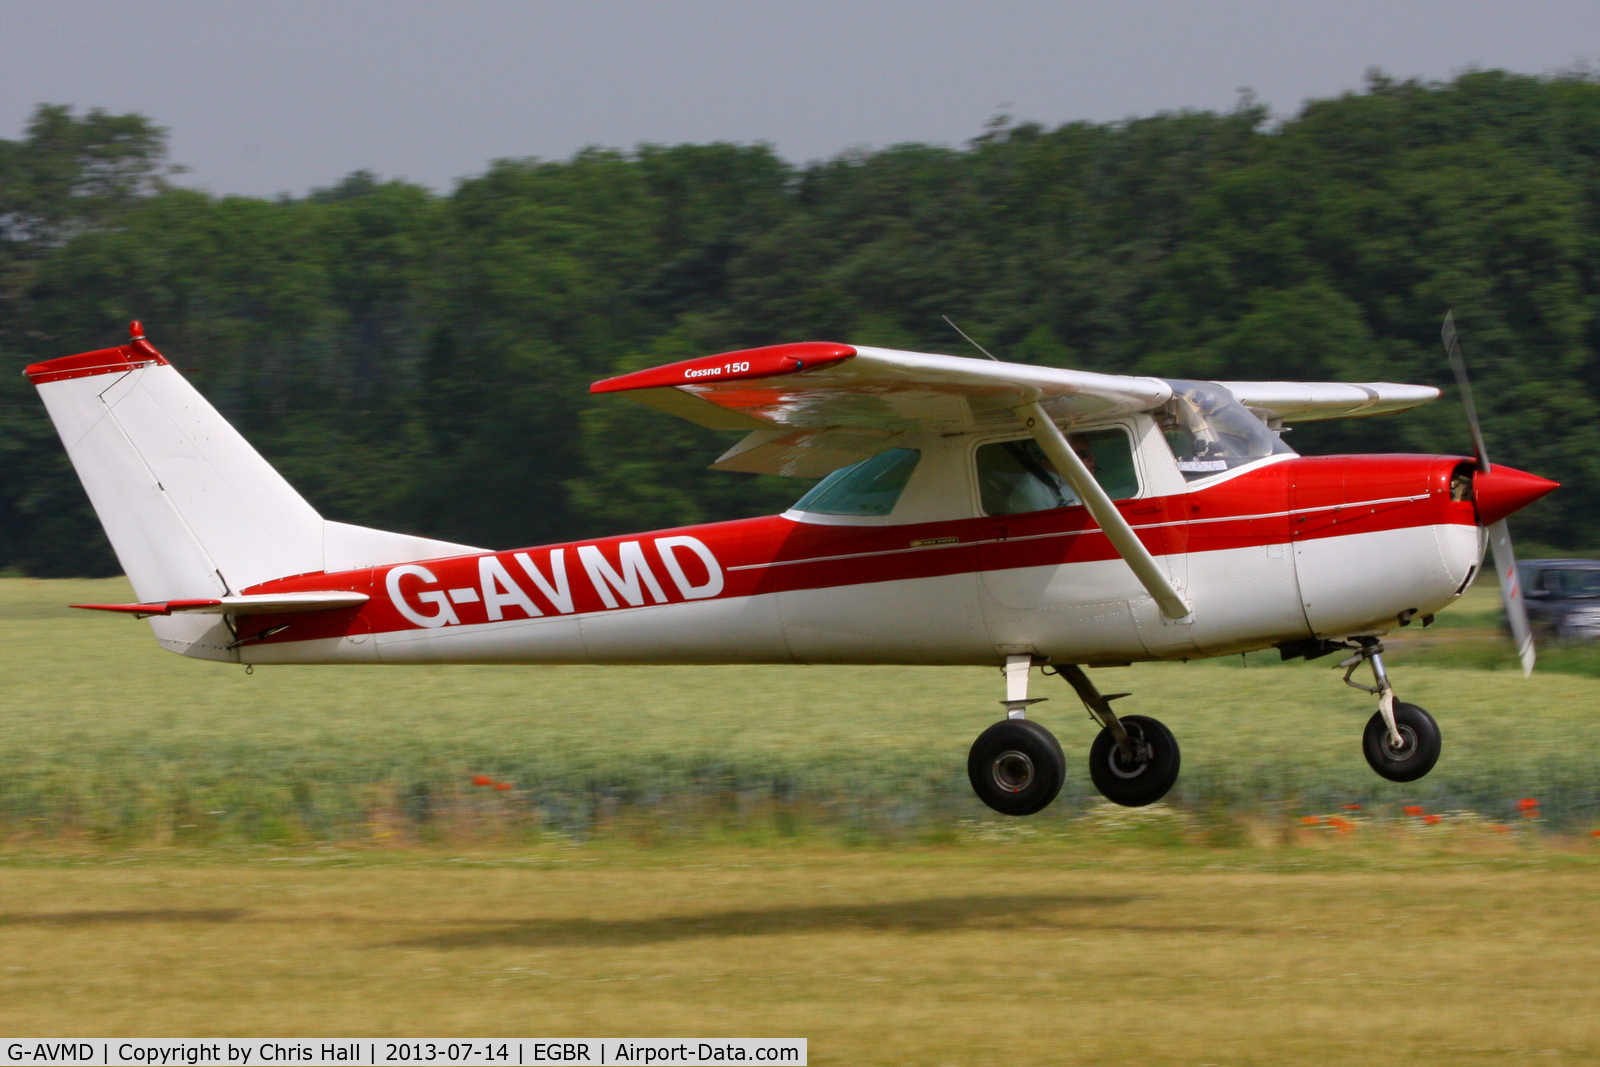 G-AVMD, 1966 Cessna 150G C/N 150-65504, at the Real Aeroplane Club's Wings & Wheels fly-in, Breighton